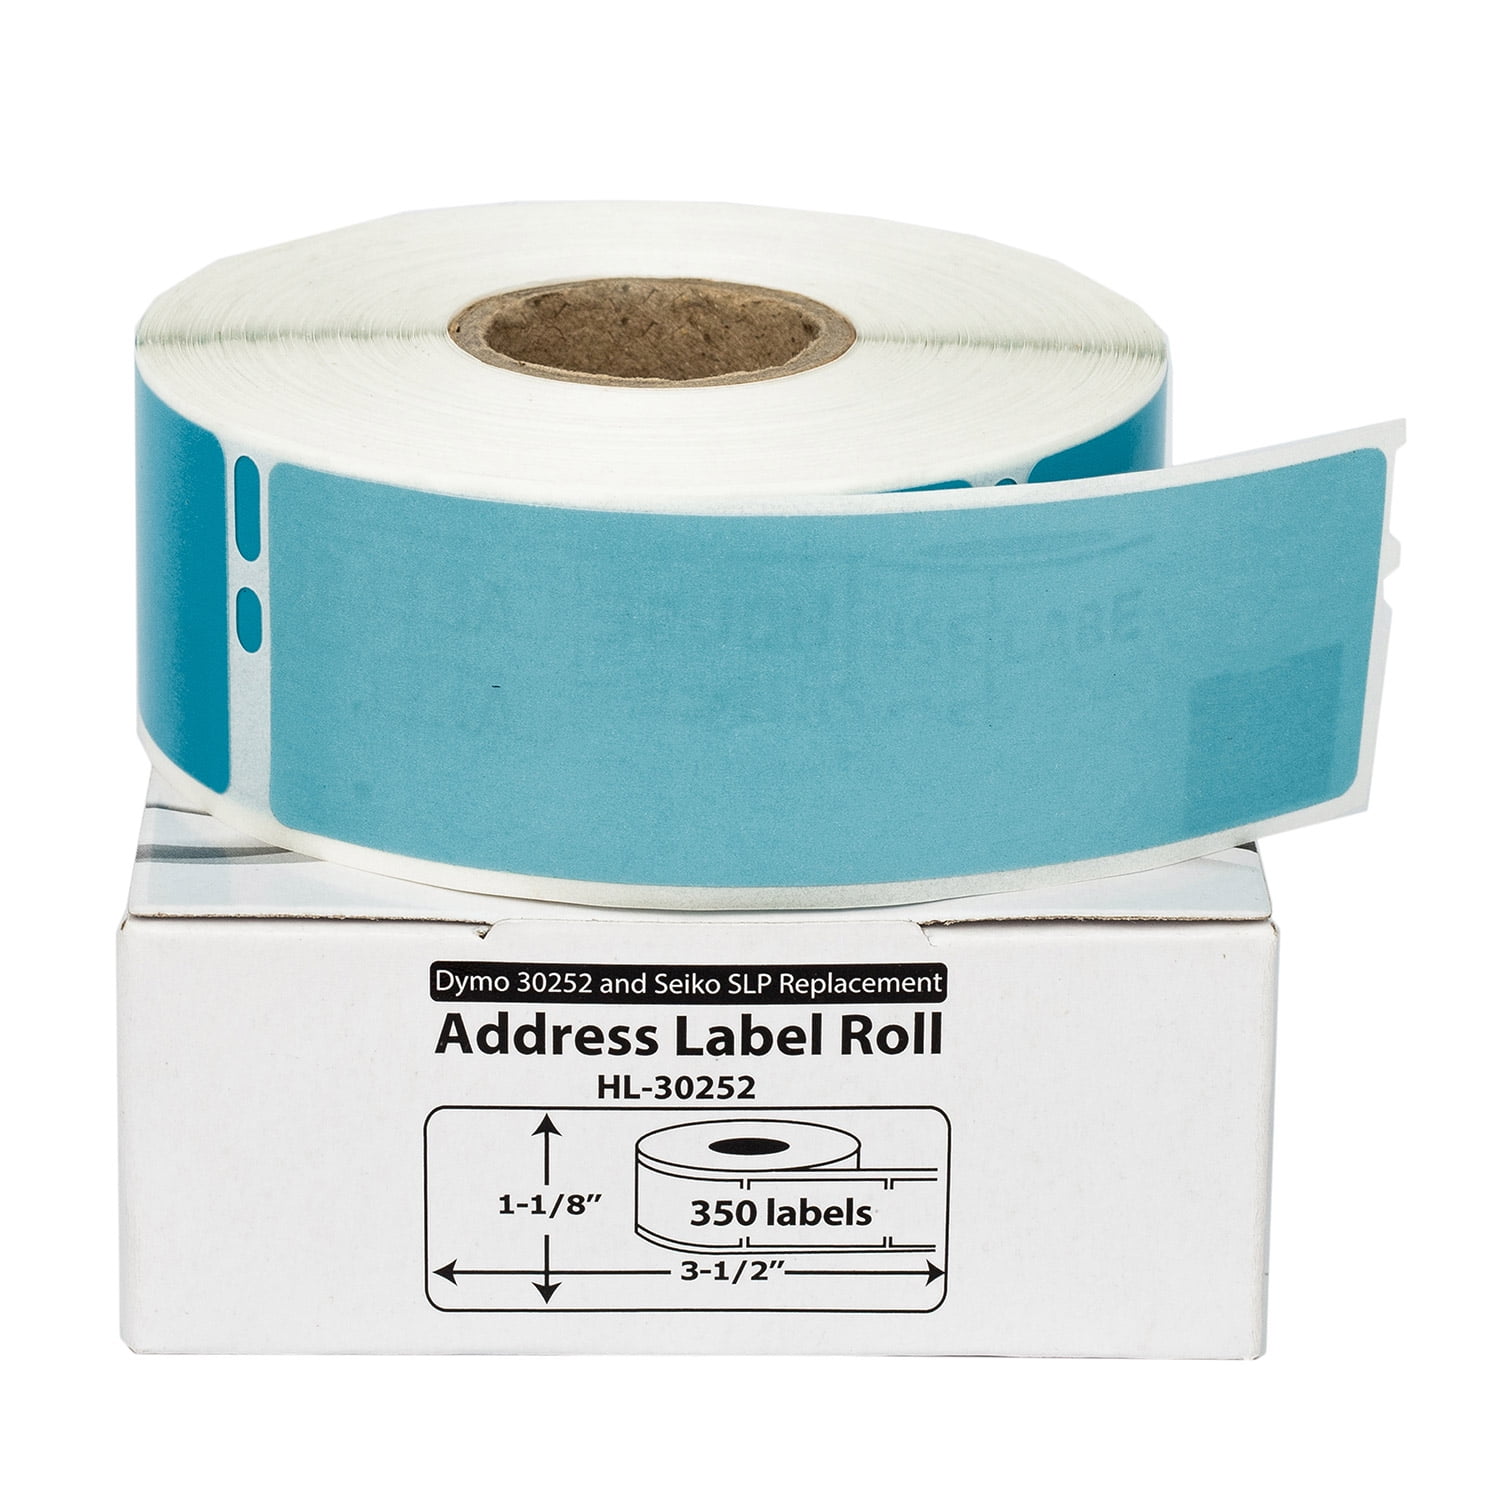 1-1/8" x 3-1/2" DYMO 30252 Direct Thermal Address Labels 42 - Rolls of 350 